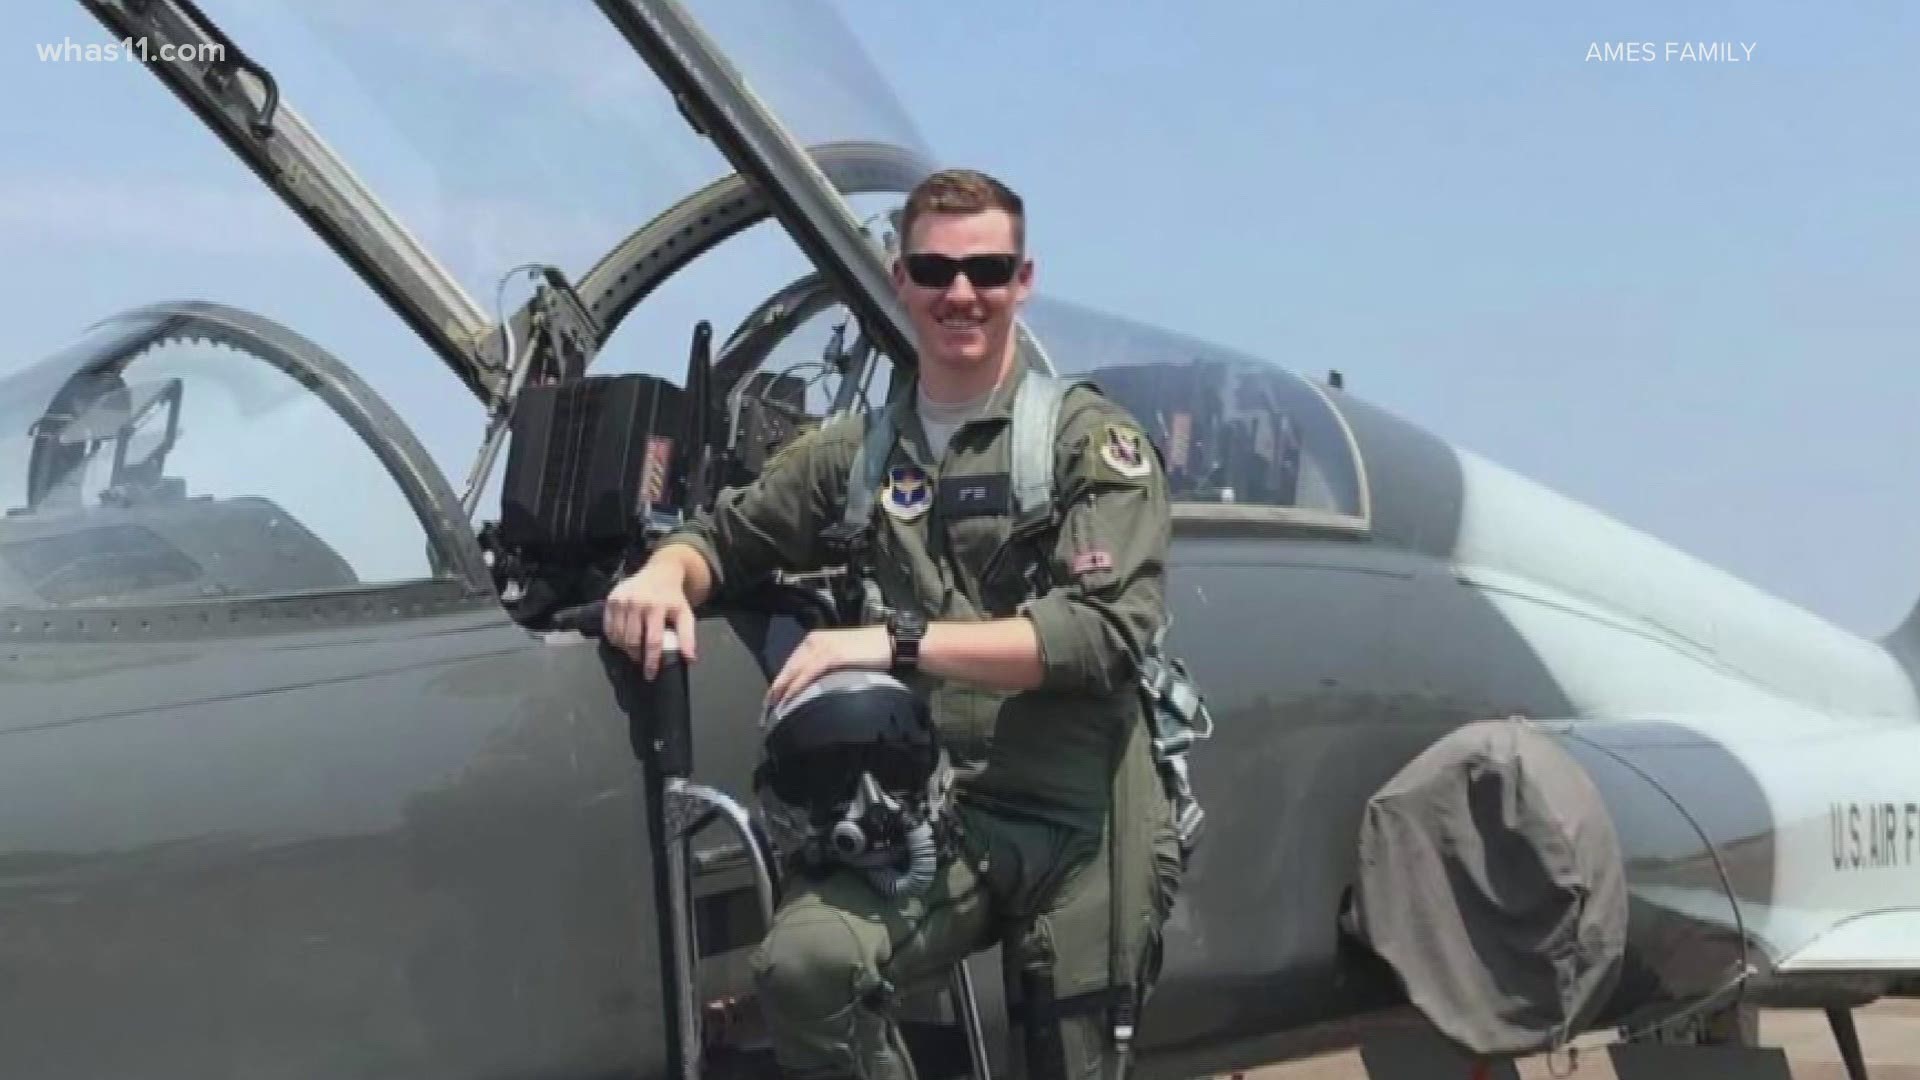 The Air Force says 24-year-old Scot Ames Jr. of Pekin died when the T-38C Talon trainer aircraft crashed Friday near Montgomery, Alabama.